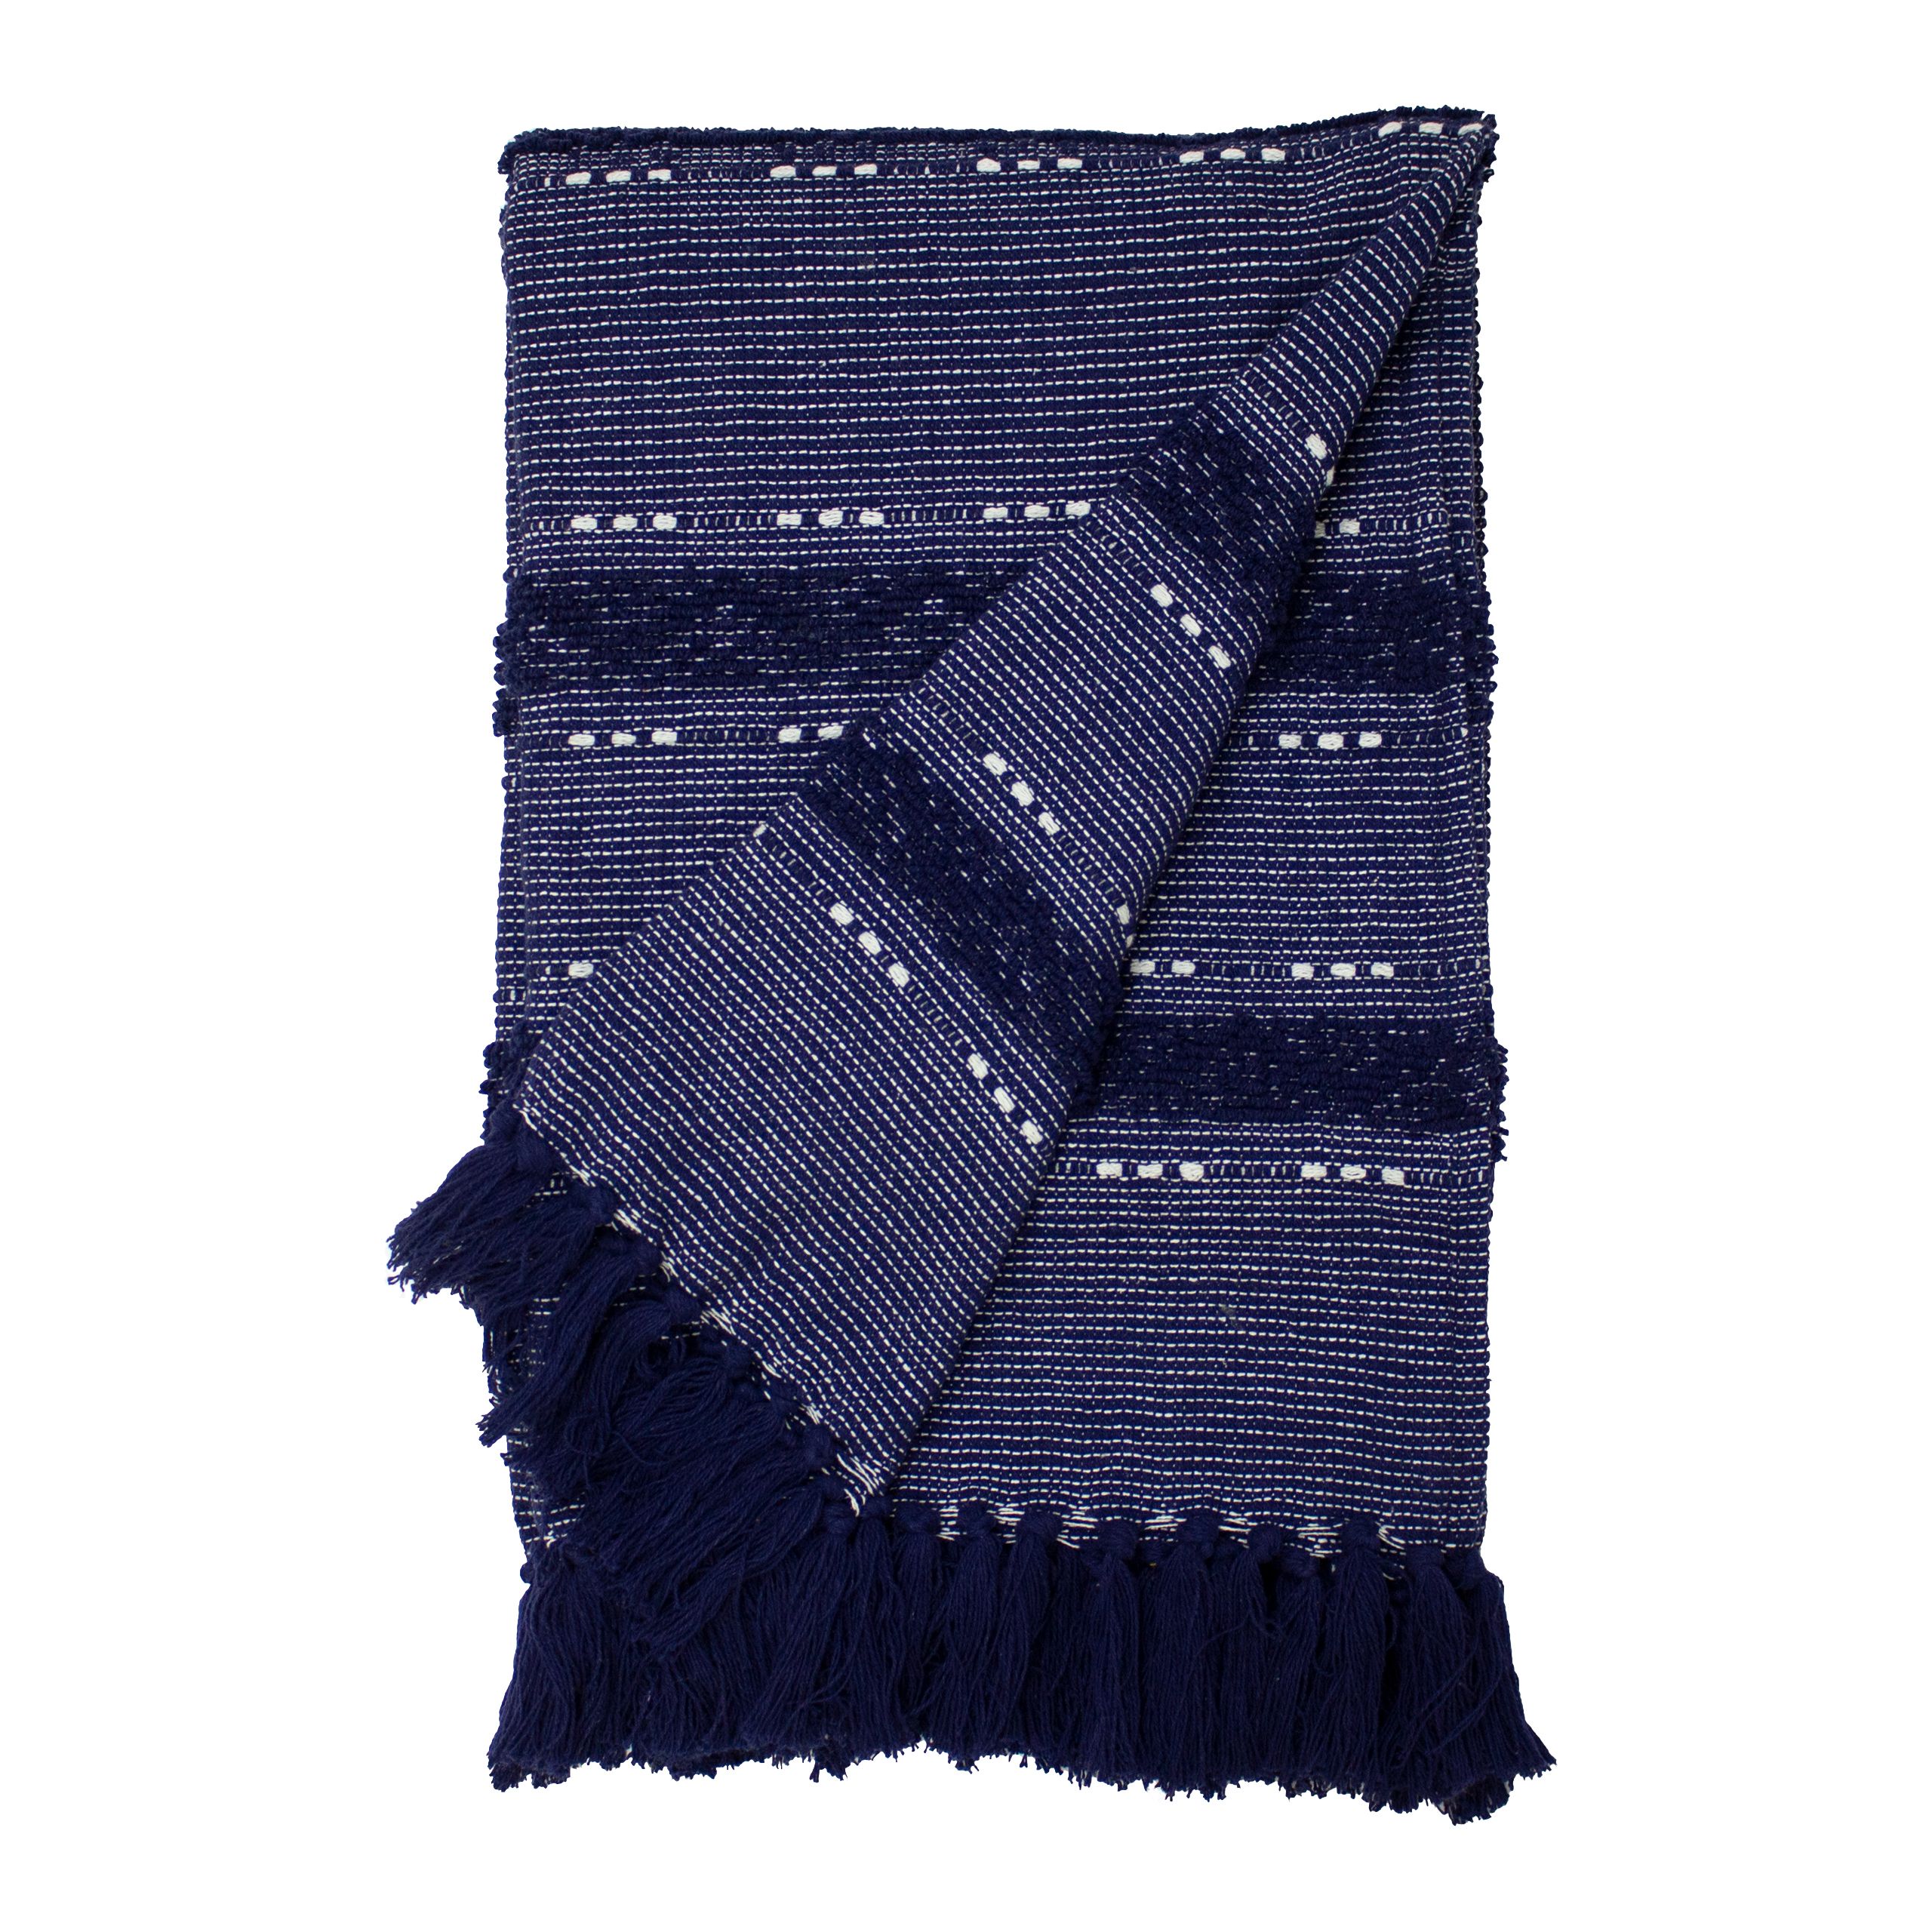 For ultimate summer styling, the Sundown cotton woven throw features contrast raised lines, tufted detail and fringing. Style and layer on a bed for a laid back look, or for cool summer evenings outside.